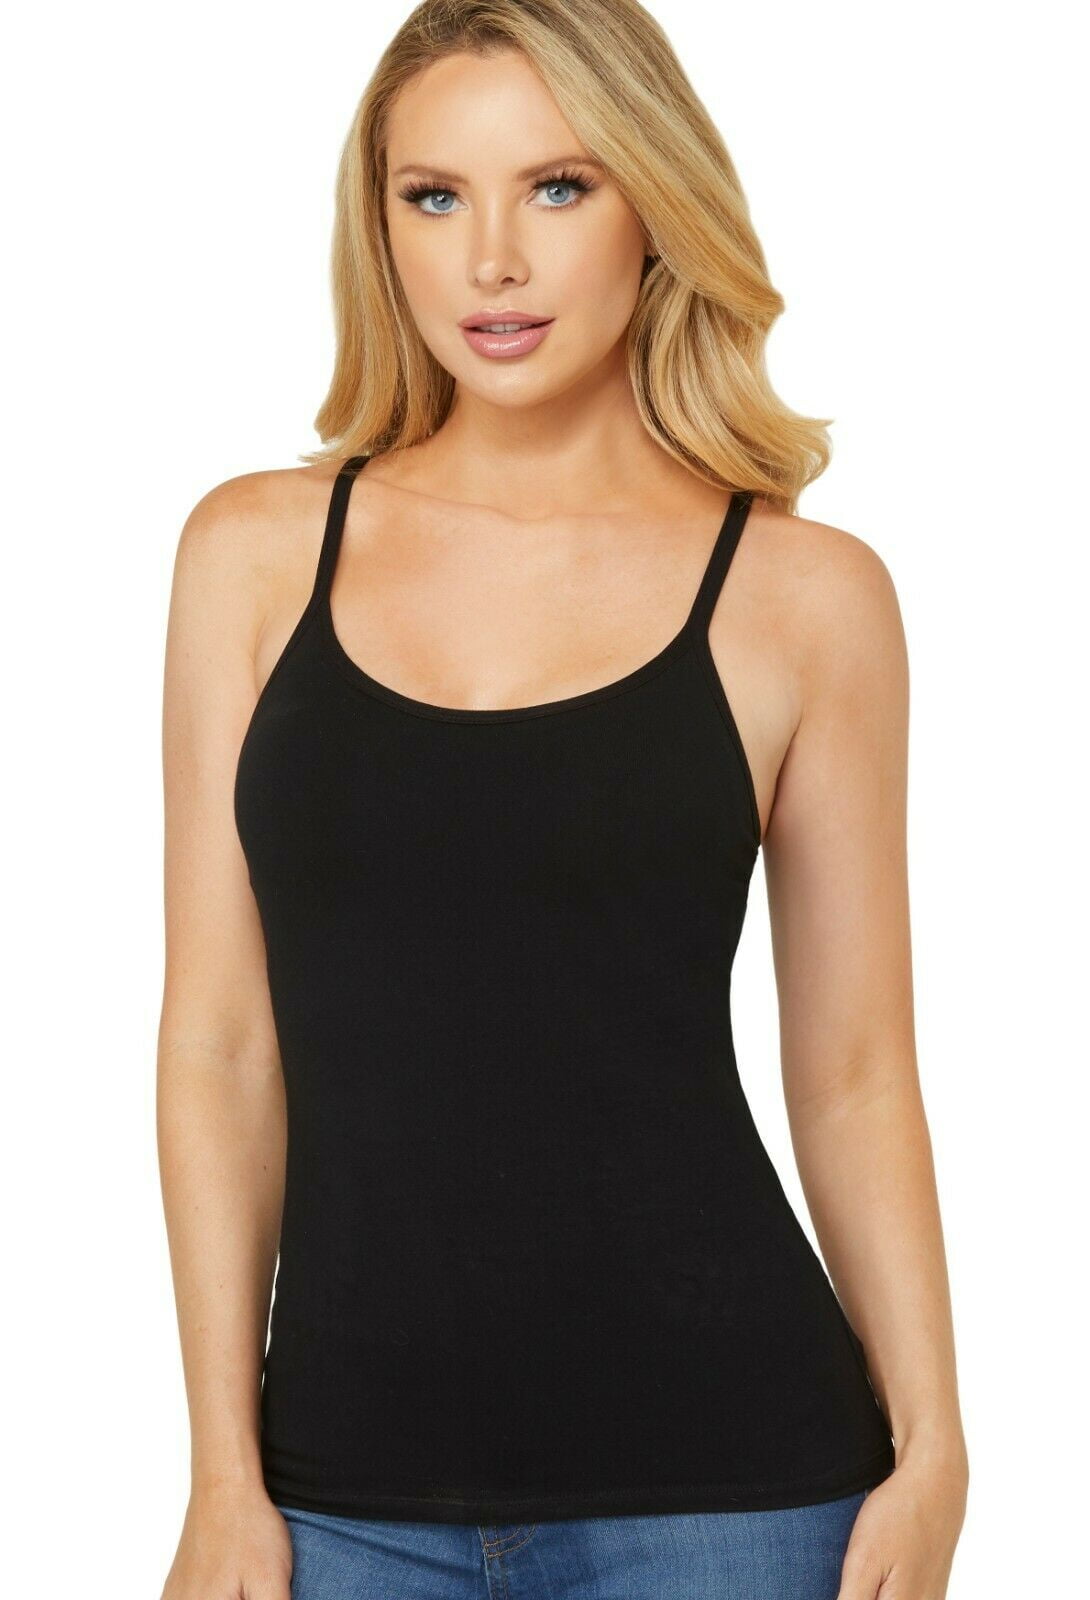 Alessandra B Wire-Free Molded Cup Classic Camisole - Walmart.com